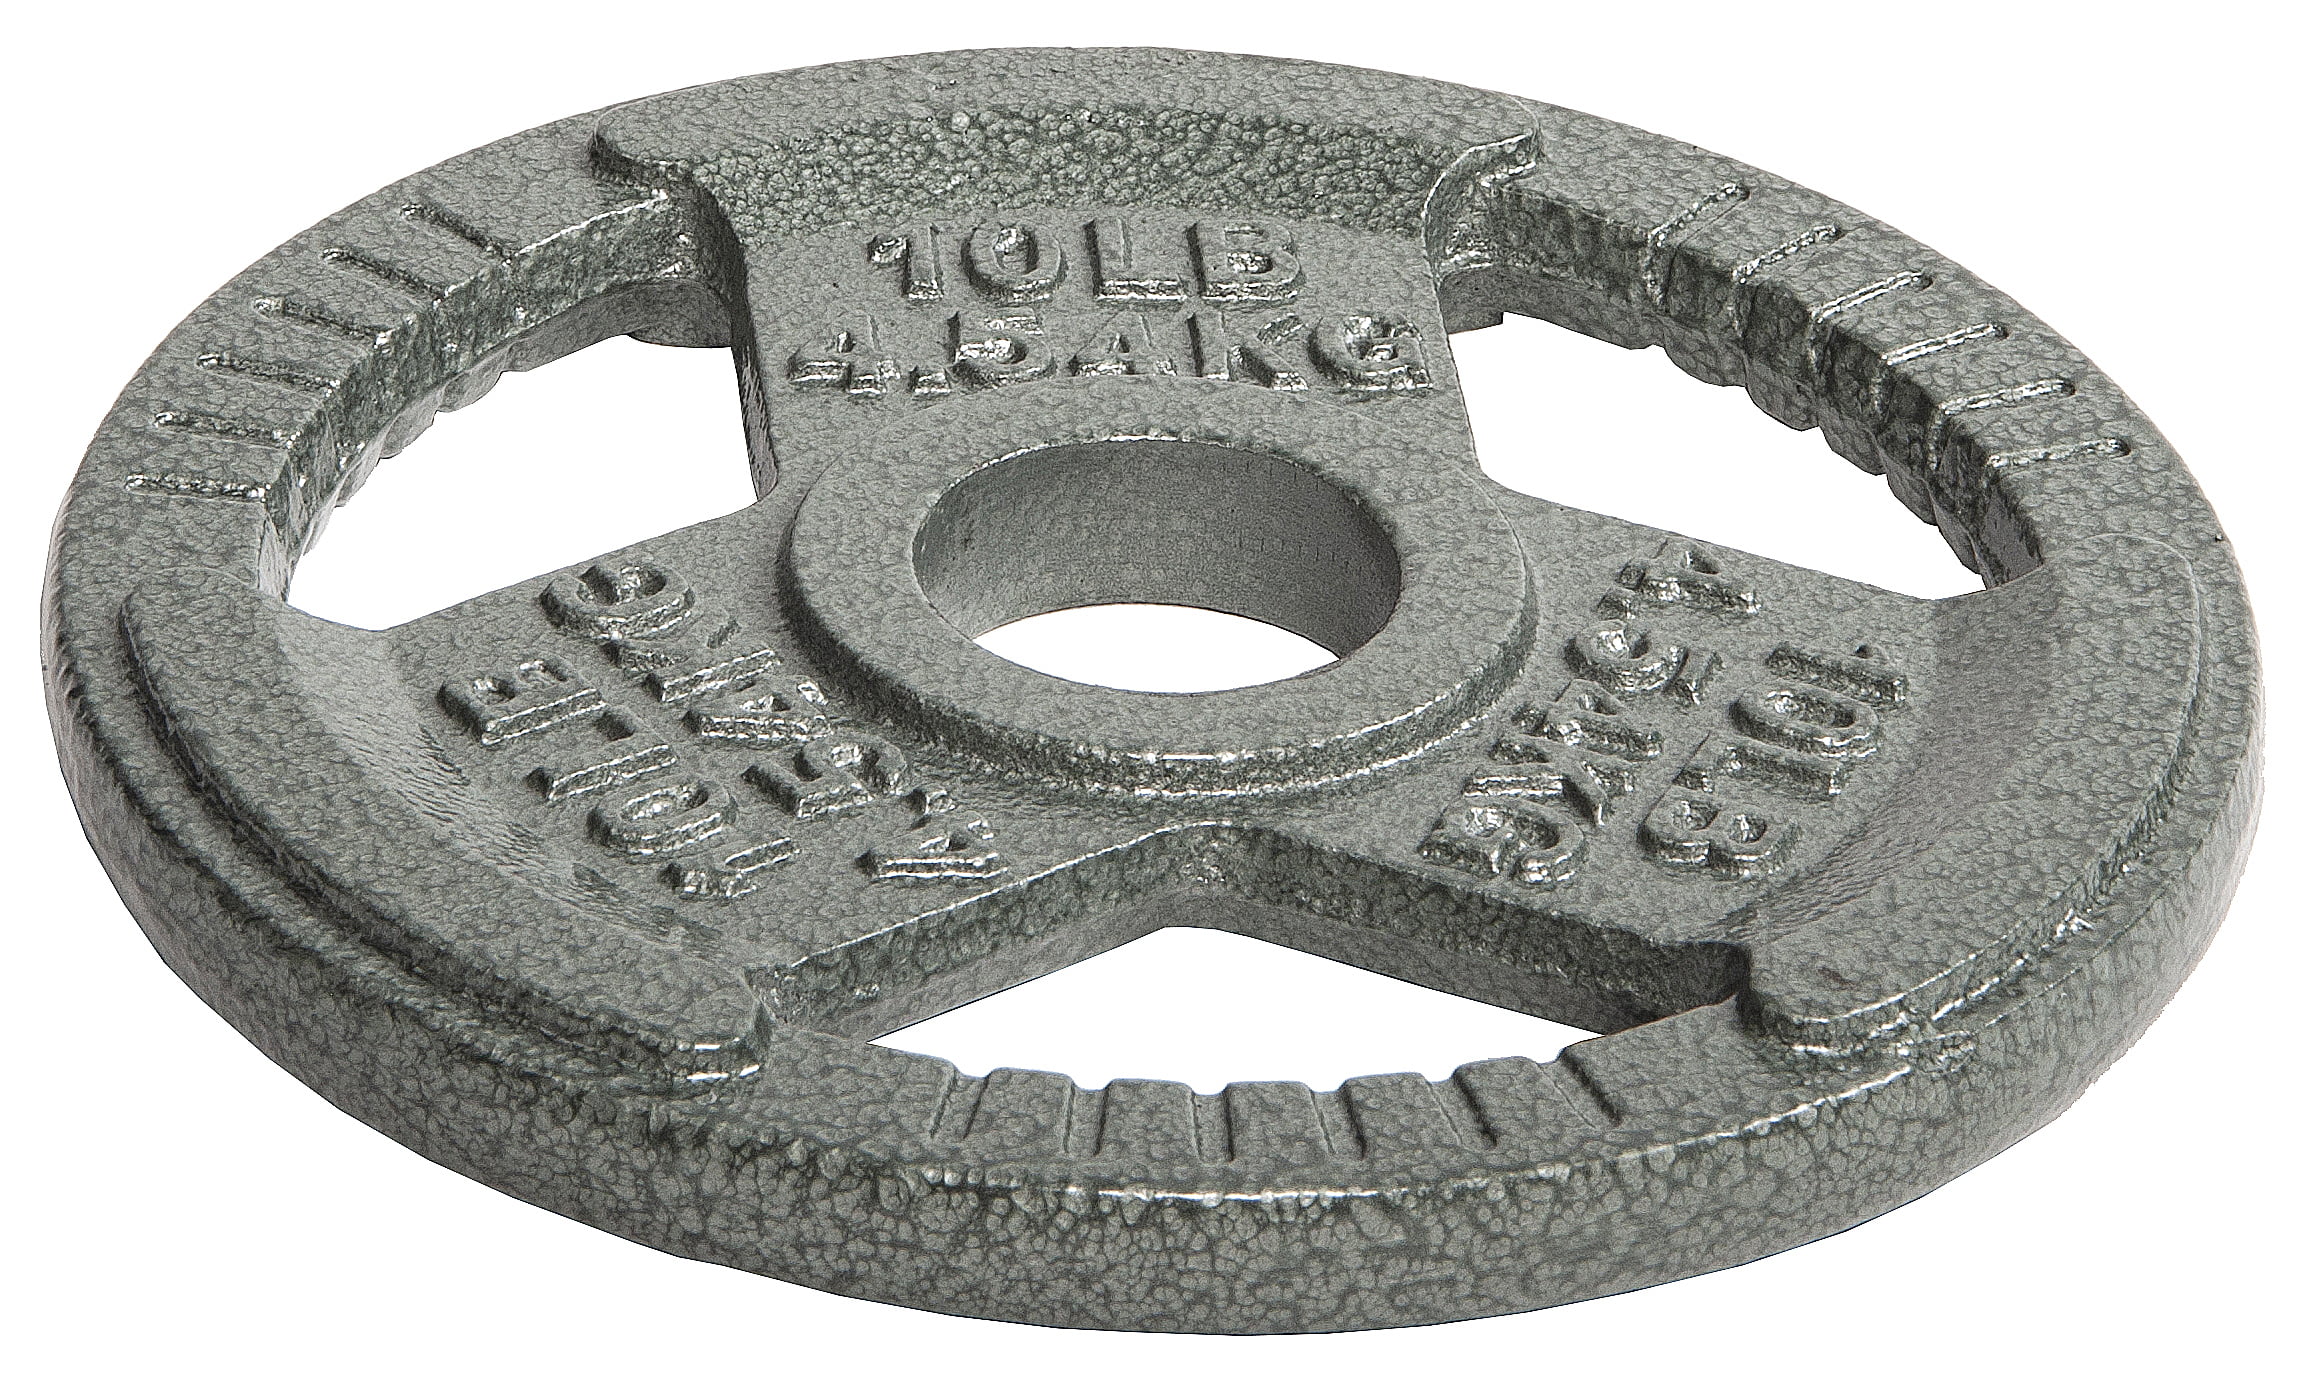 French Fitness Cast Iron Olympic Weight Plate V1 2.5 lbs (New)